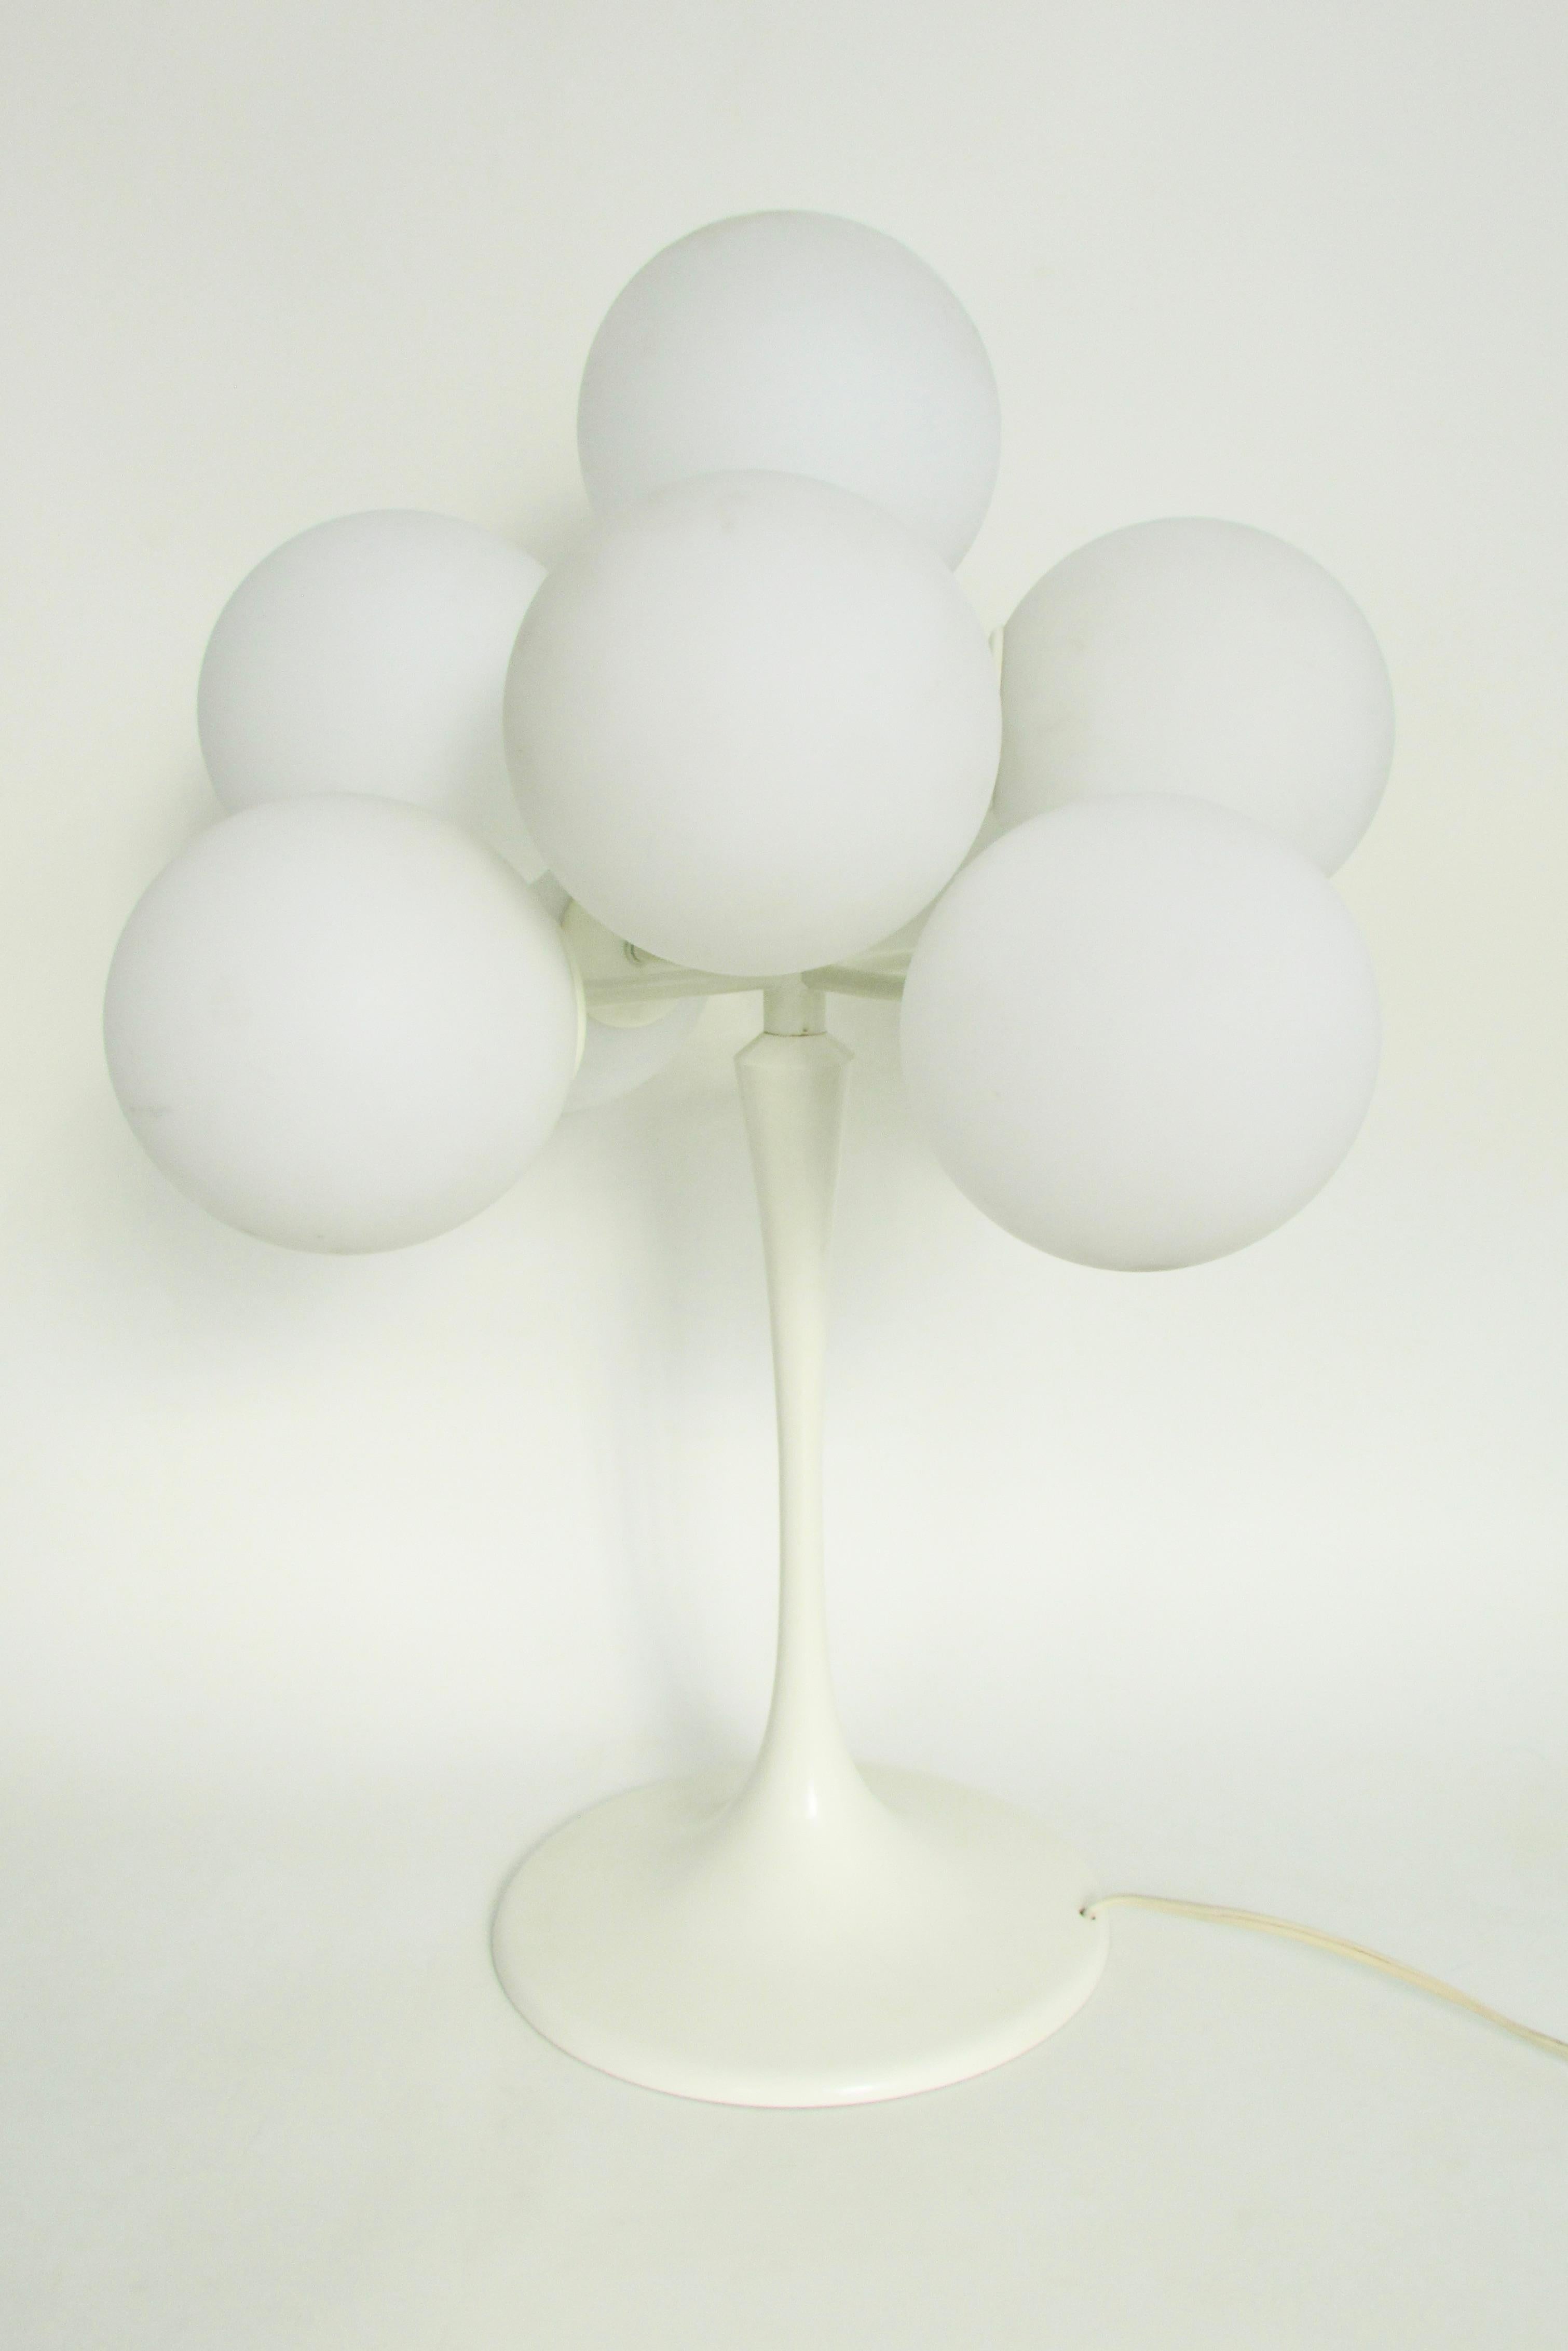 Max Bill white glass globe table lamp For Sale 3